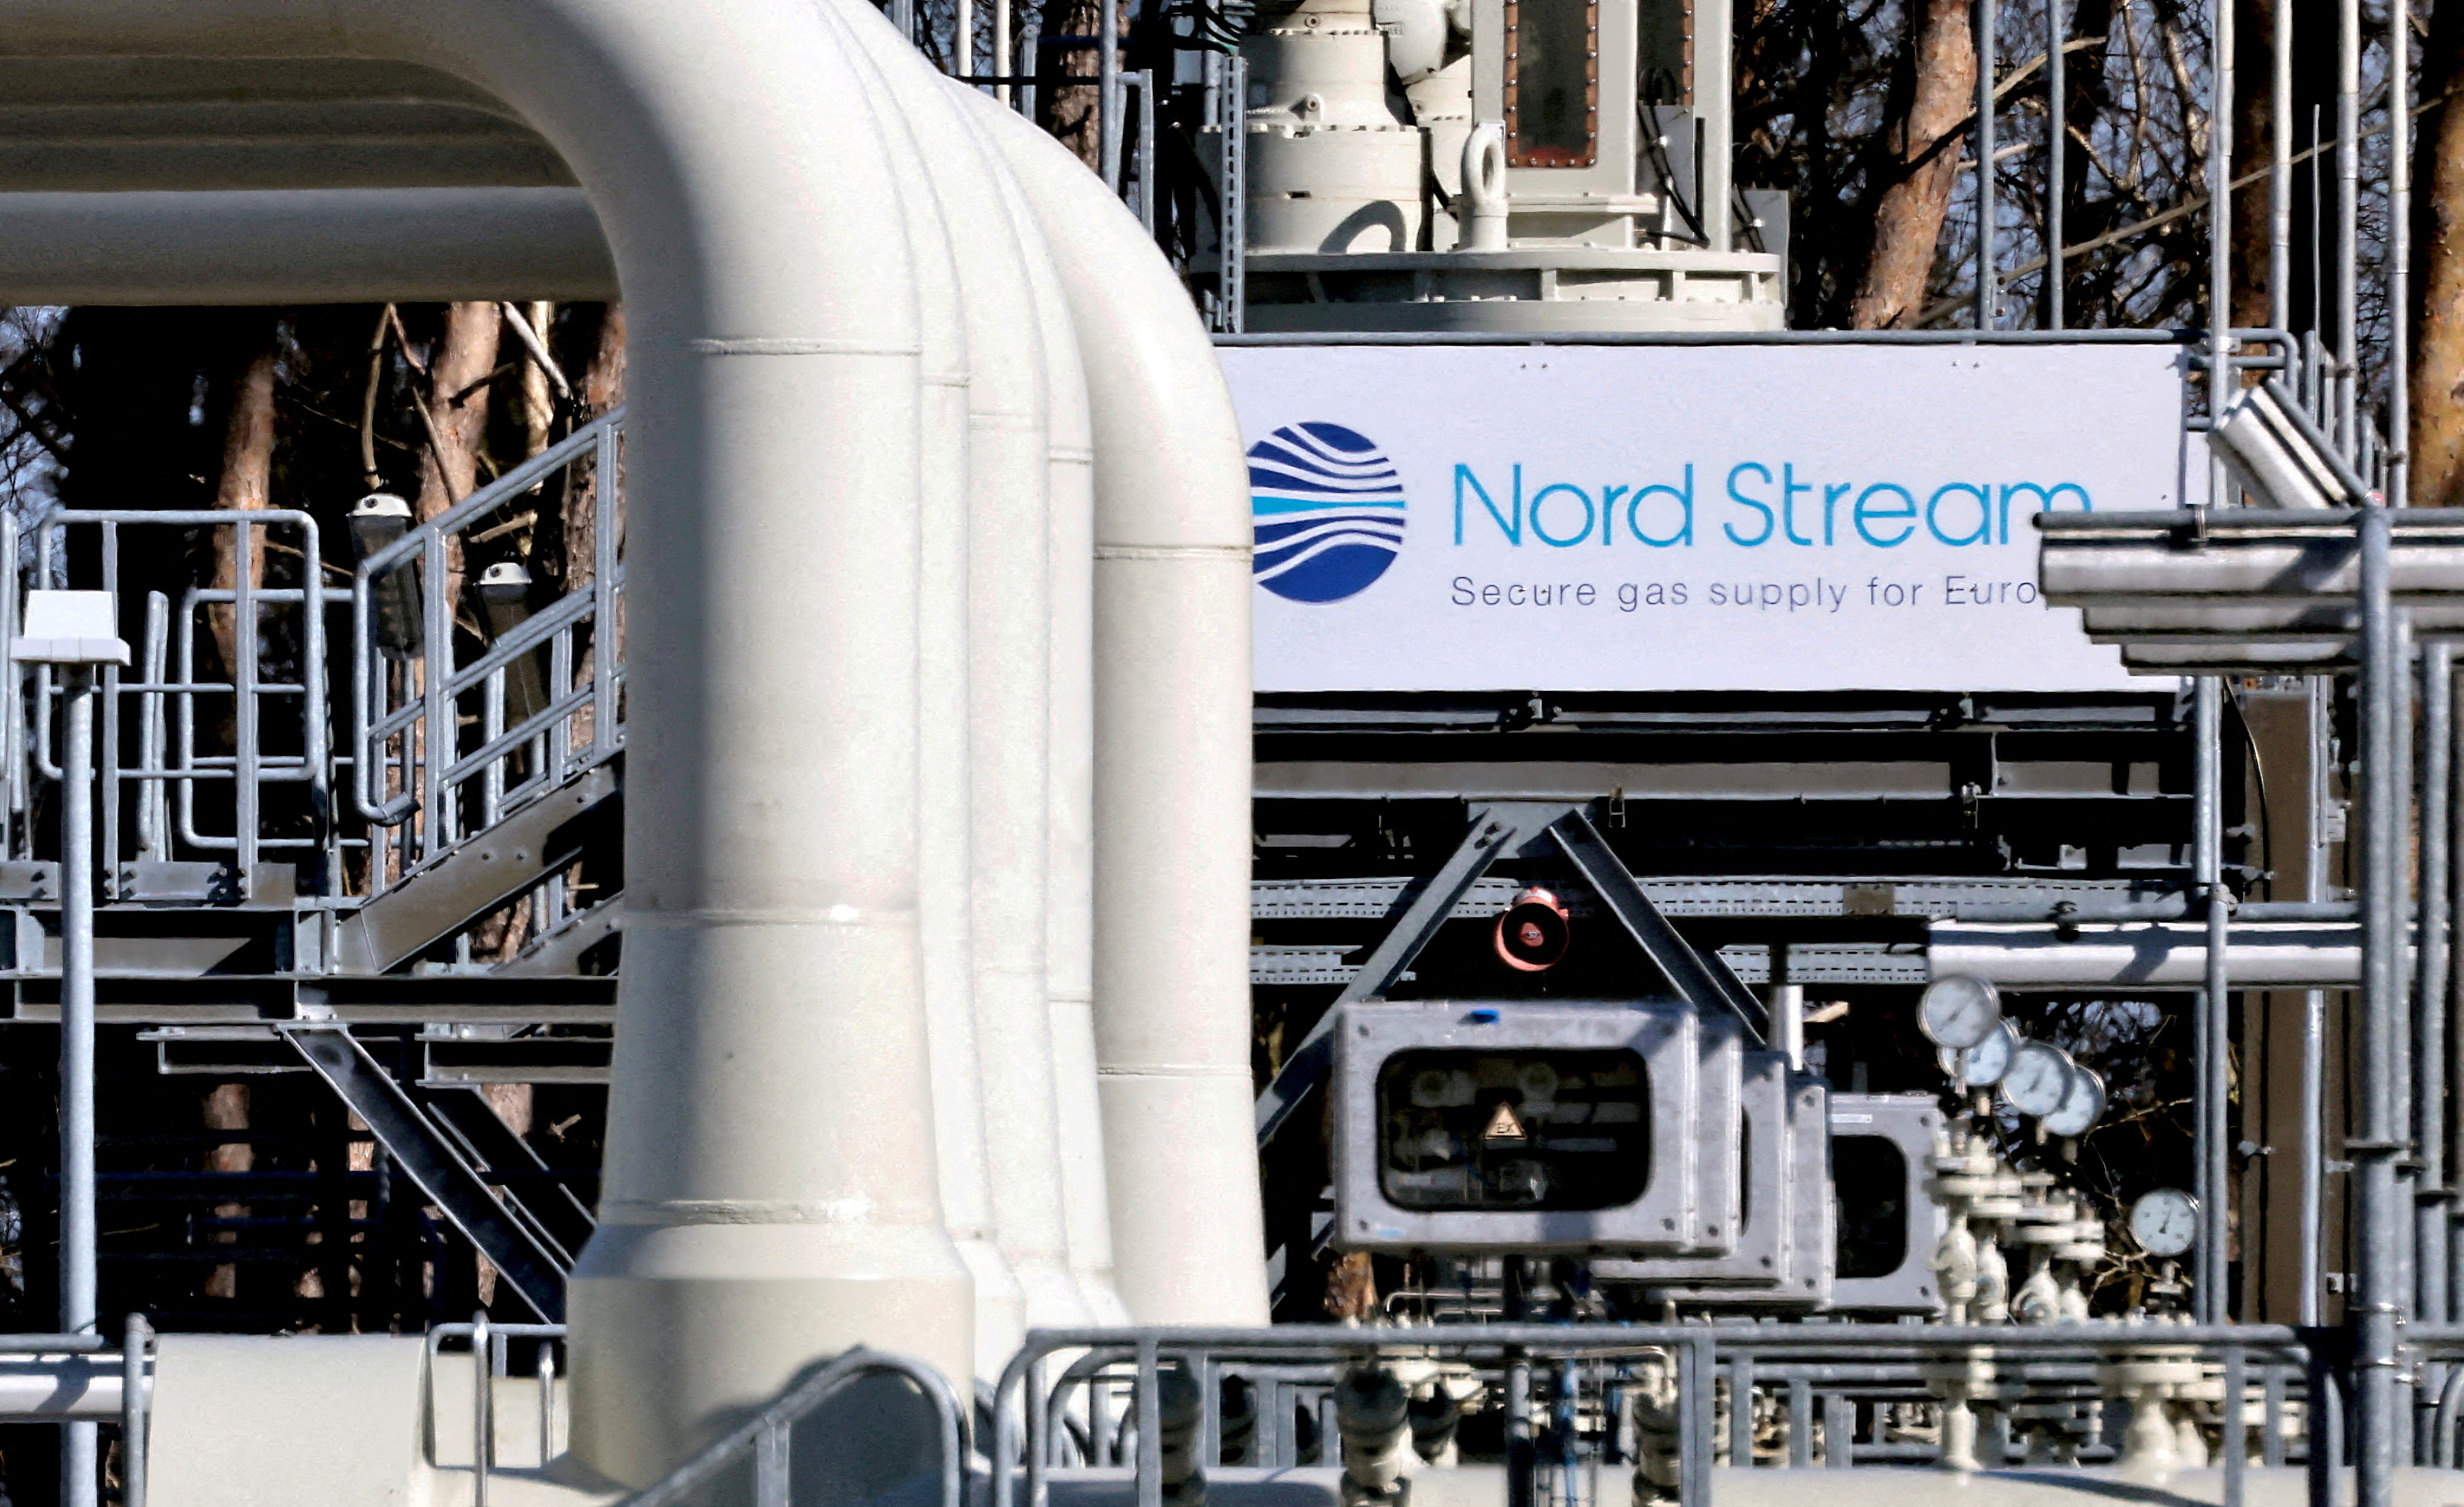 Nord Stream 1 runs from Russia to Germany through Baltic Sea